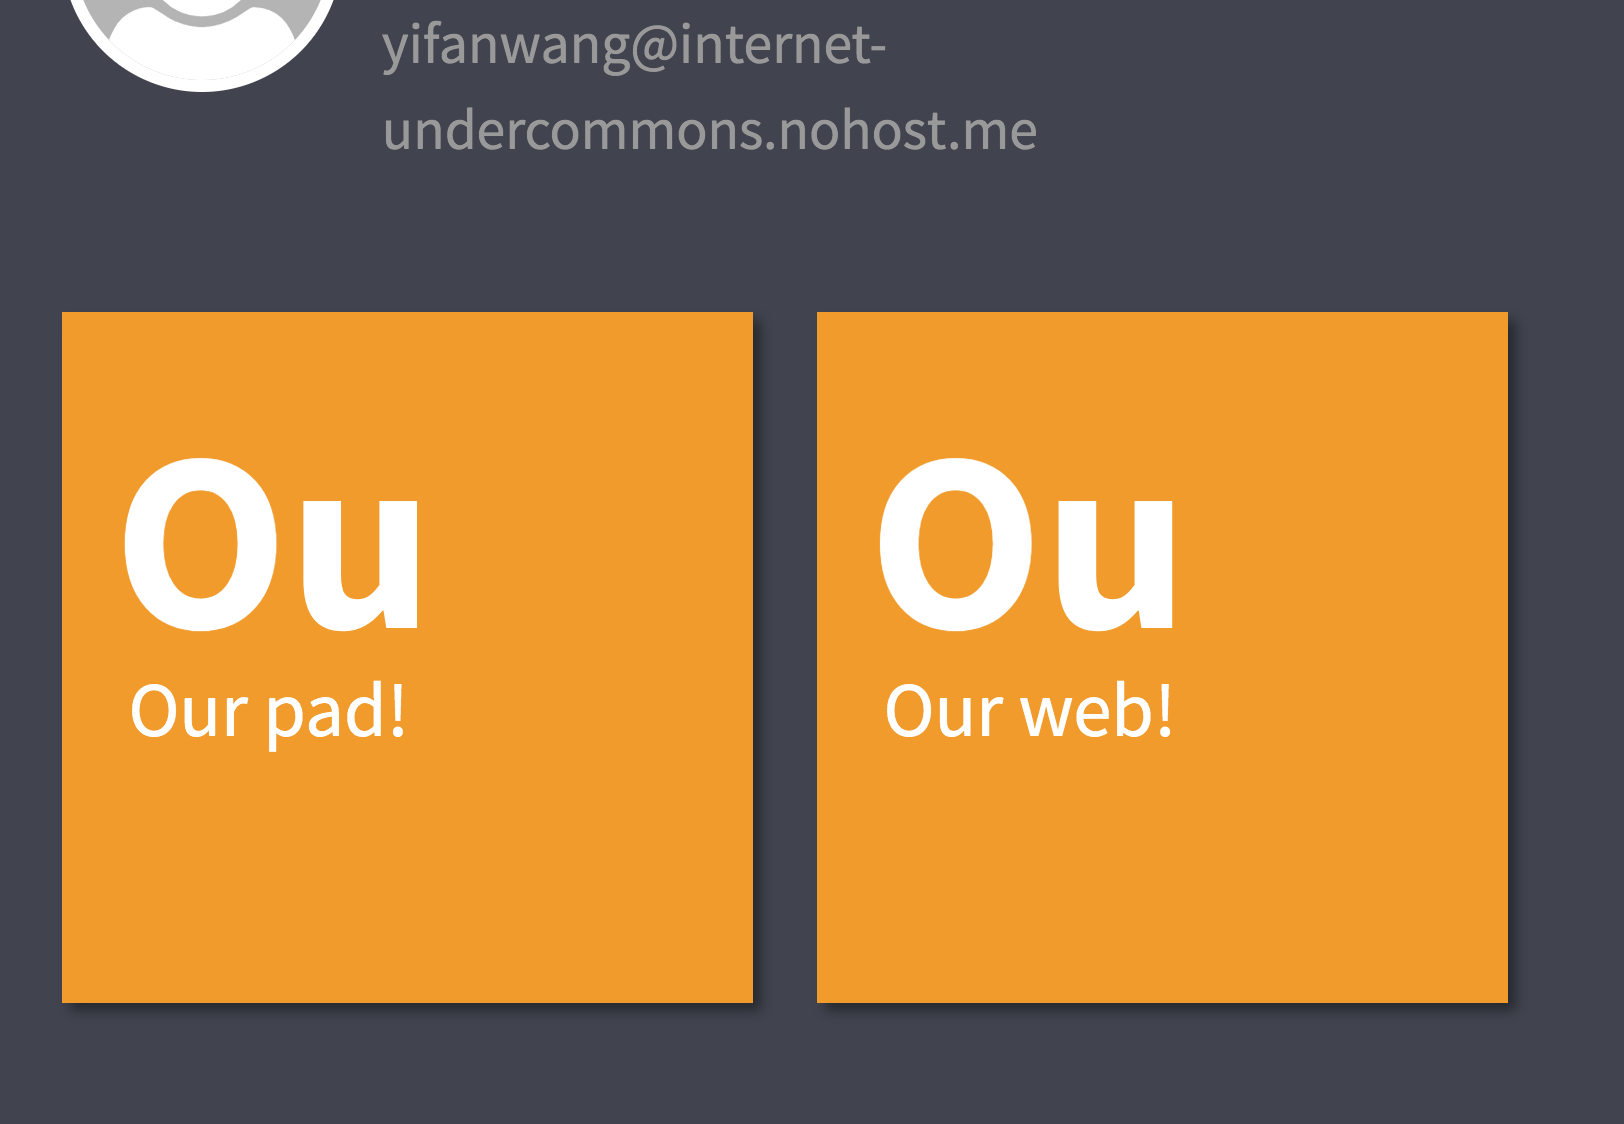 our web! our pad!
                        